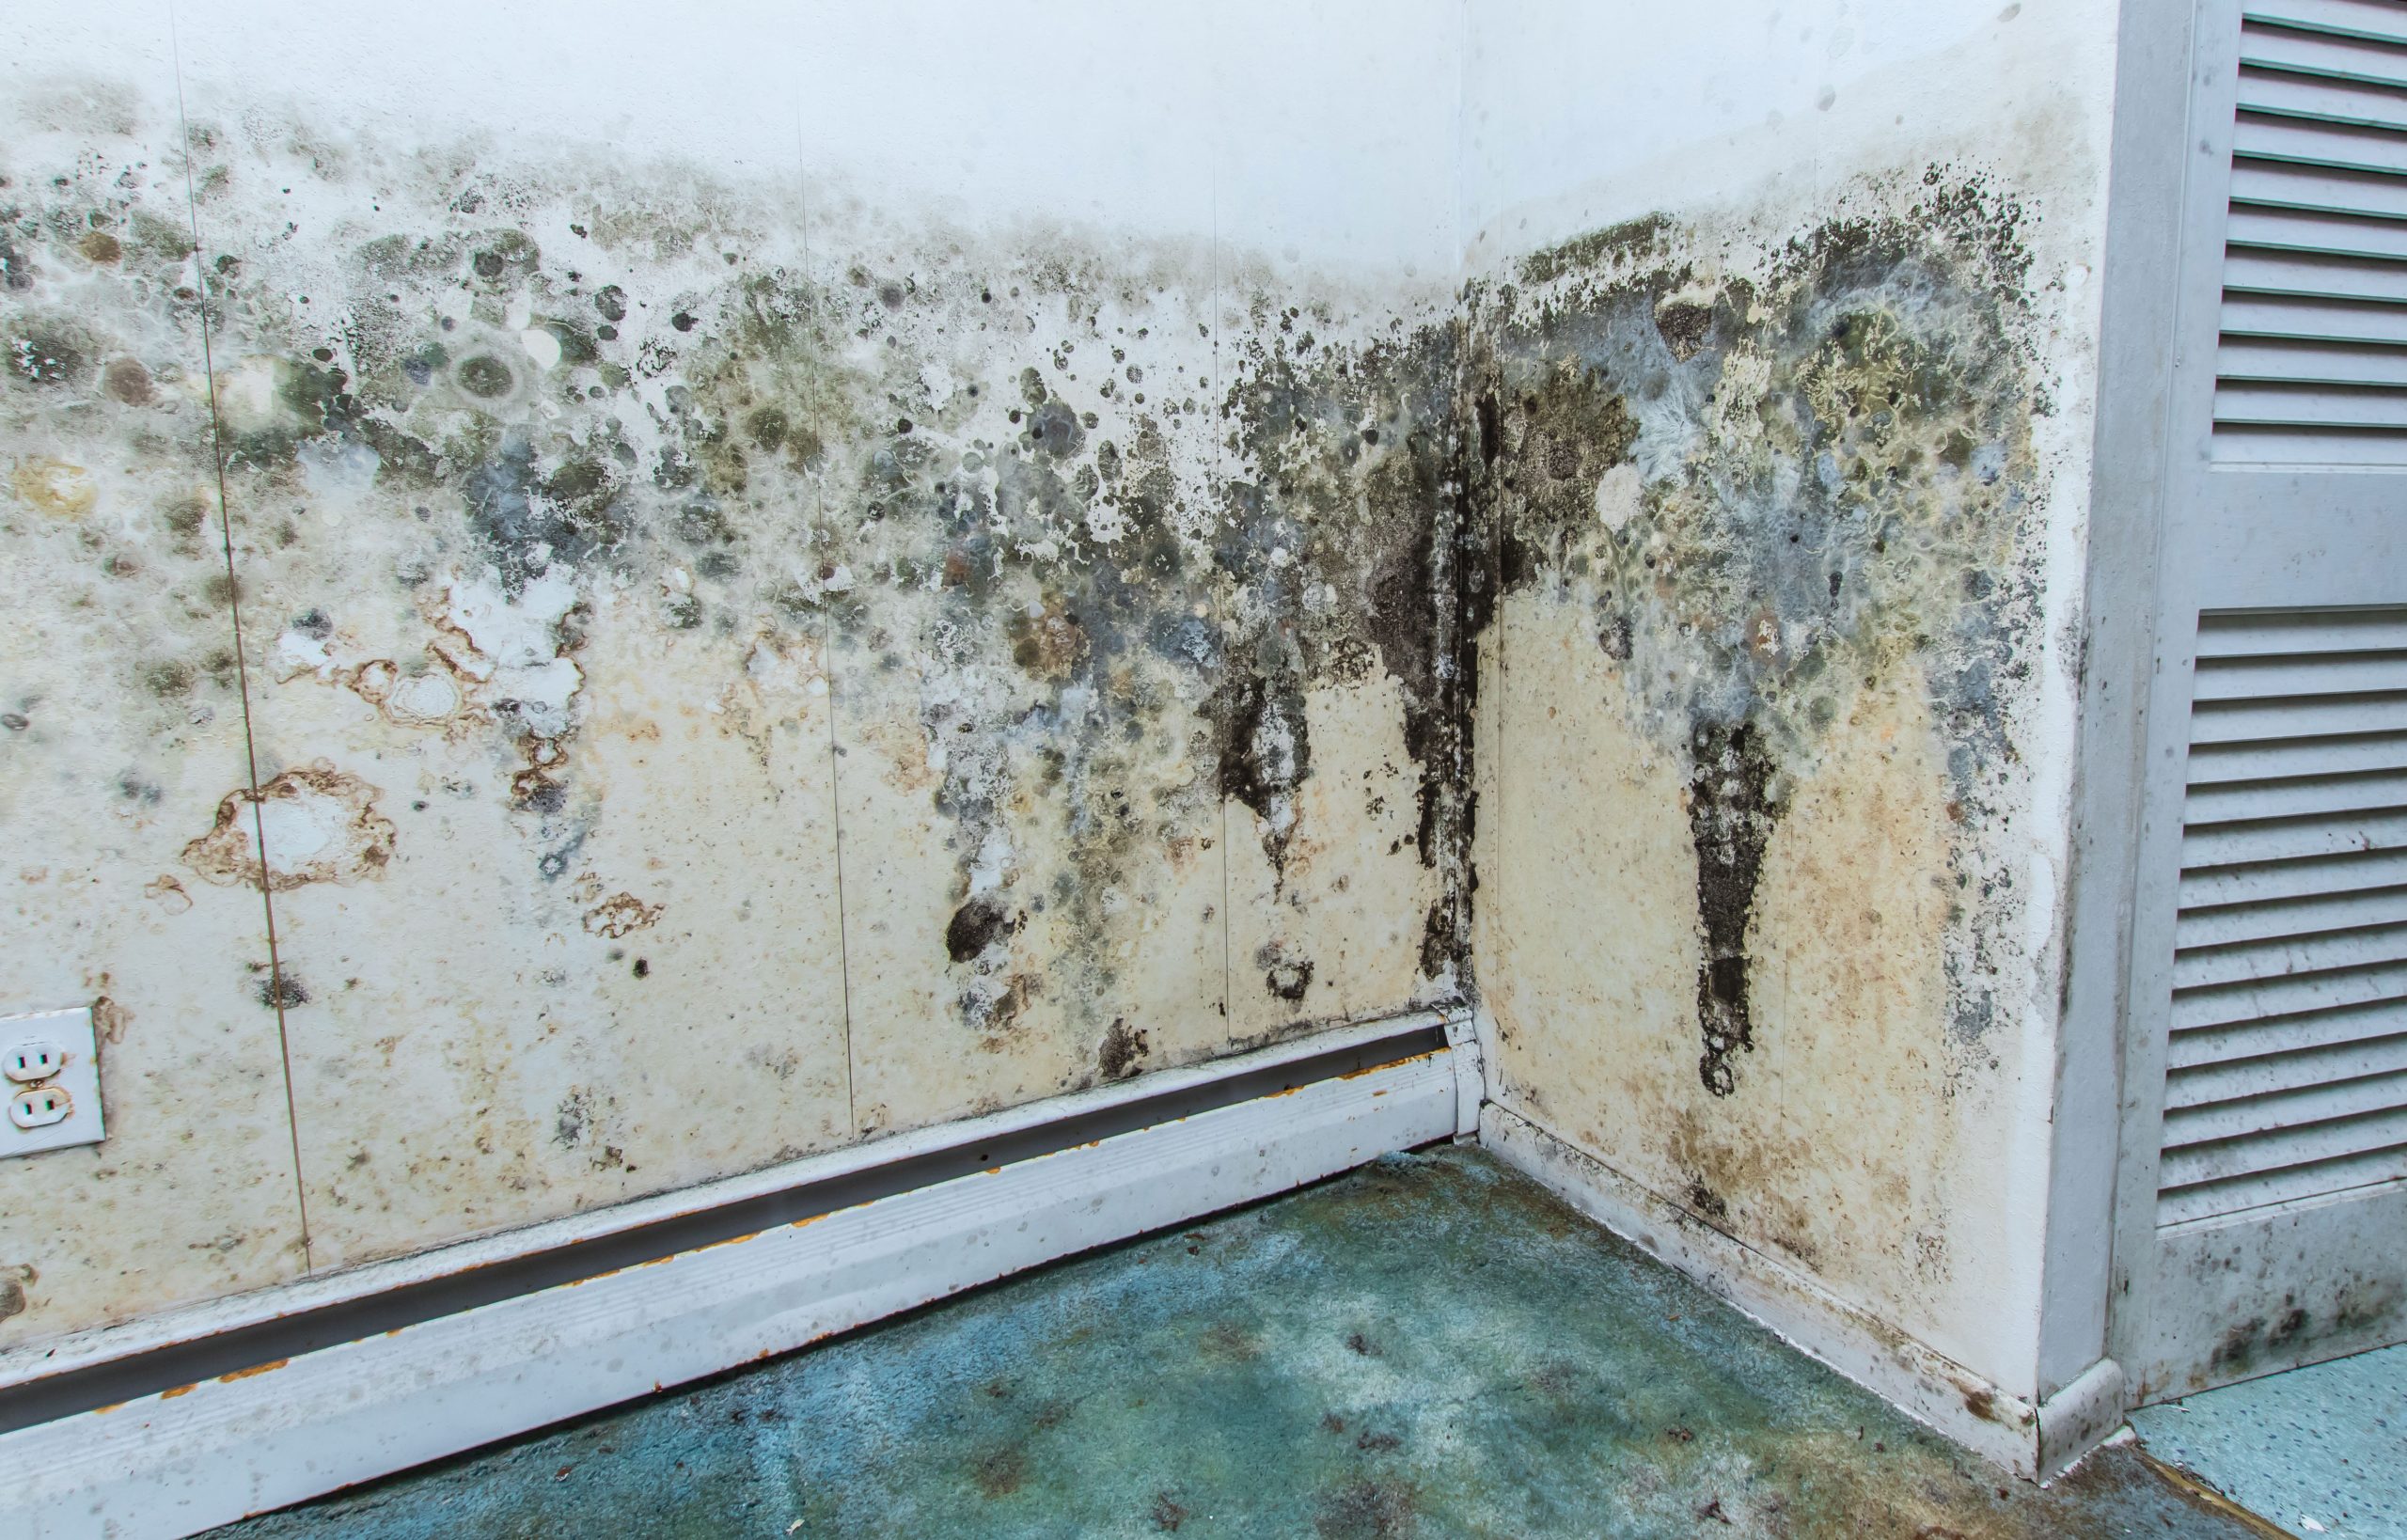 Black mold remediation services on an interior dining room wall in a home in Hattiesburg, MS.